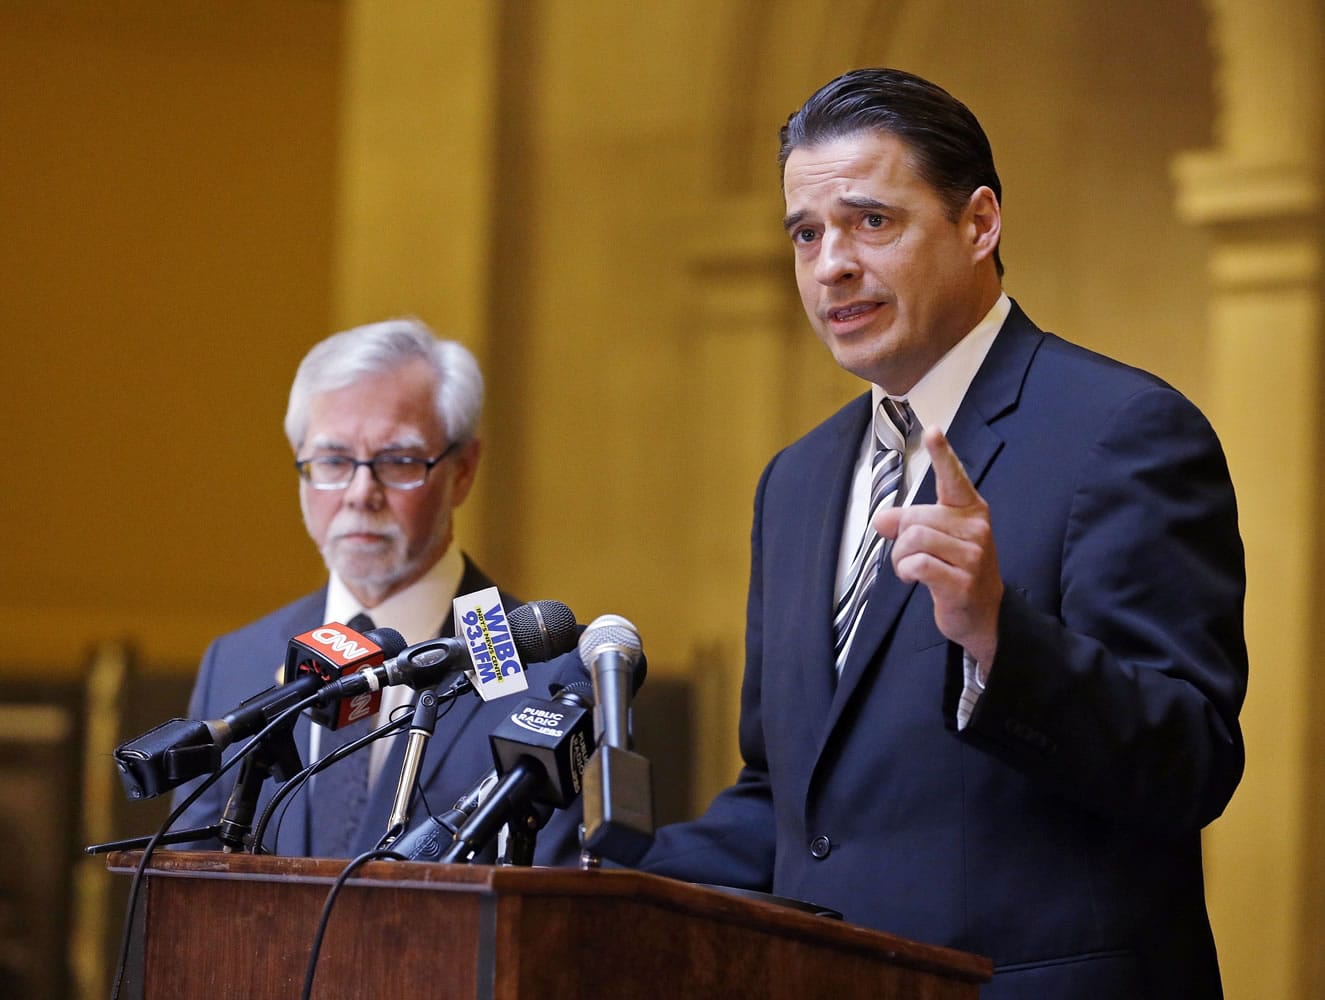 Indiana Senate Democratic Leader Tim Lanane, left, D-Anderson, and Indiana House Democratic Leader Scott Pelath, D-Michigan City, call for the repeal of the Indiana Religious Freedom Restoration Act during a press conference at the Statehouse in Indianapolis on Monday.